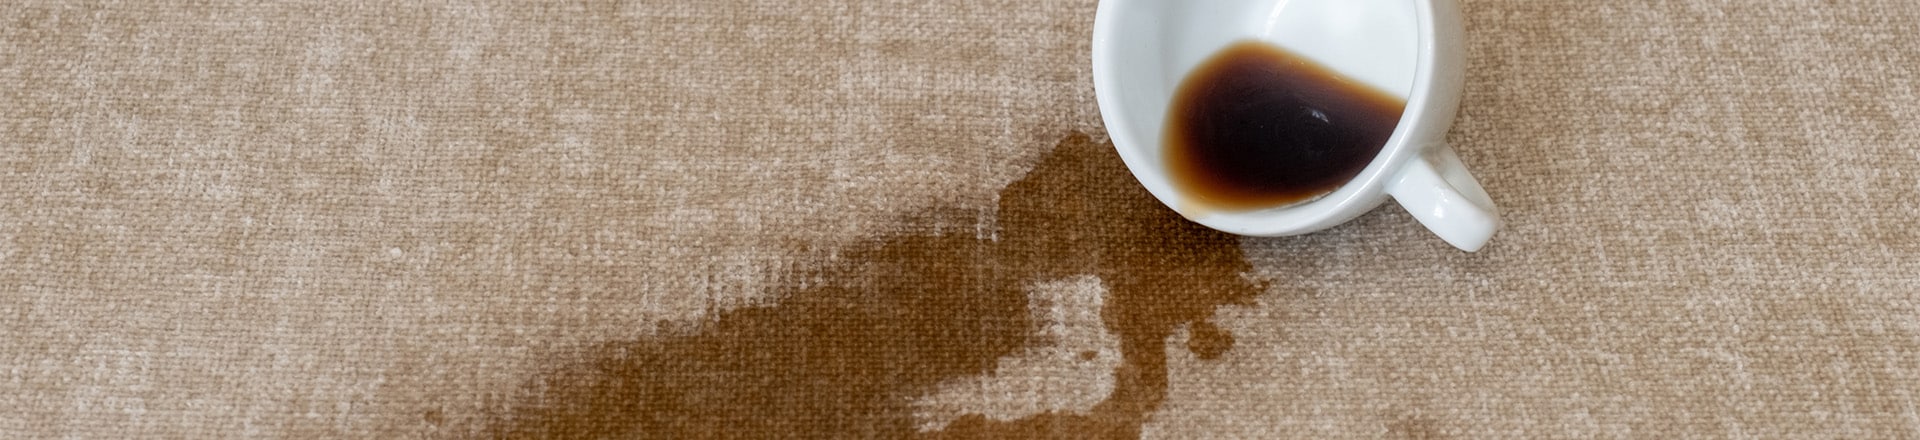 114 Most Common Carpet Stains and What to Do About Them